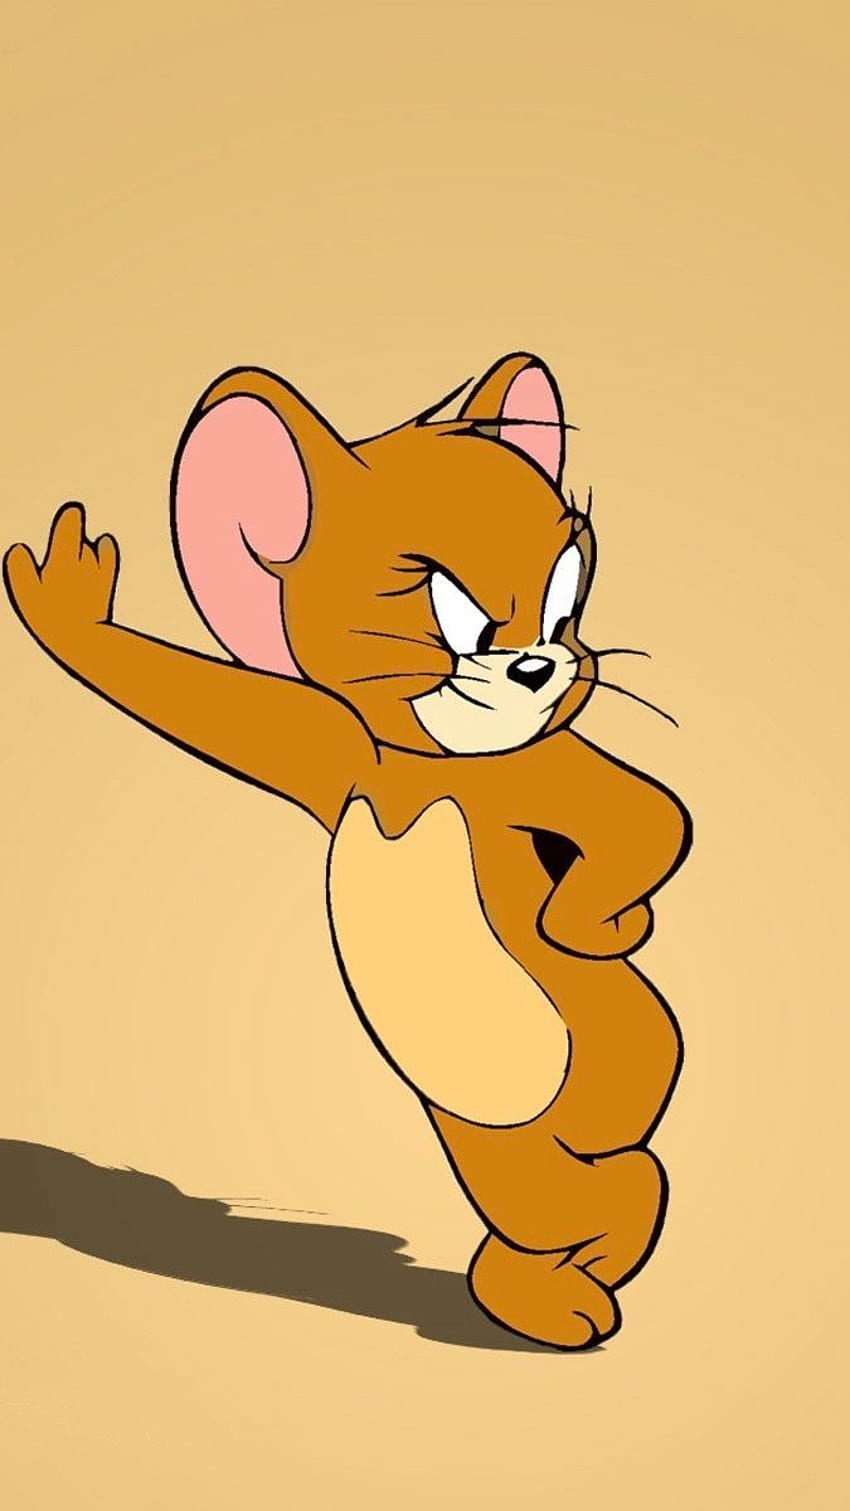 Tom and Jerry coloring step by step || Tom and jerry drawing coloring page  - YouTube